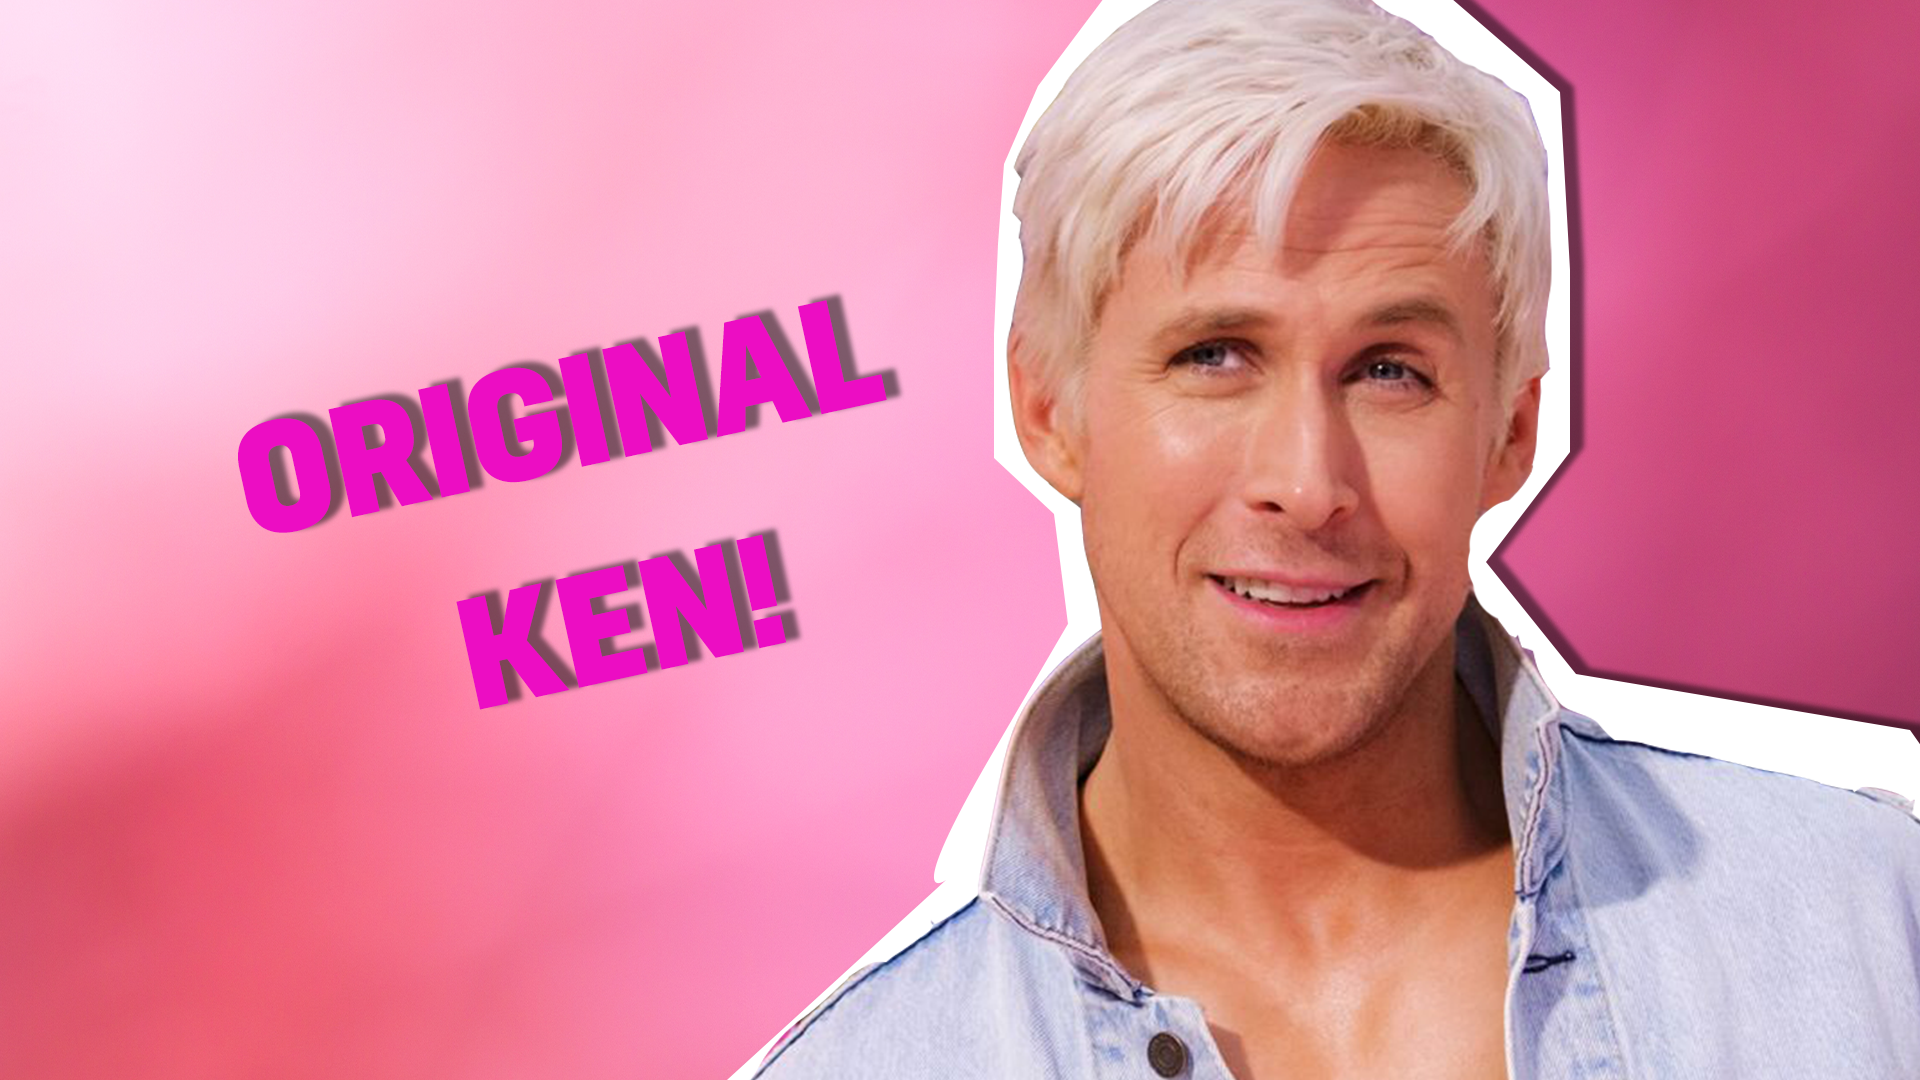 You're original Ken! You're the one and only, Ken 1.0! There's no one quite like you, although you're not exactly unique!